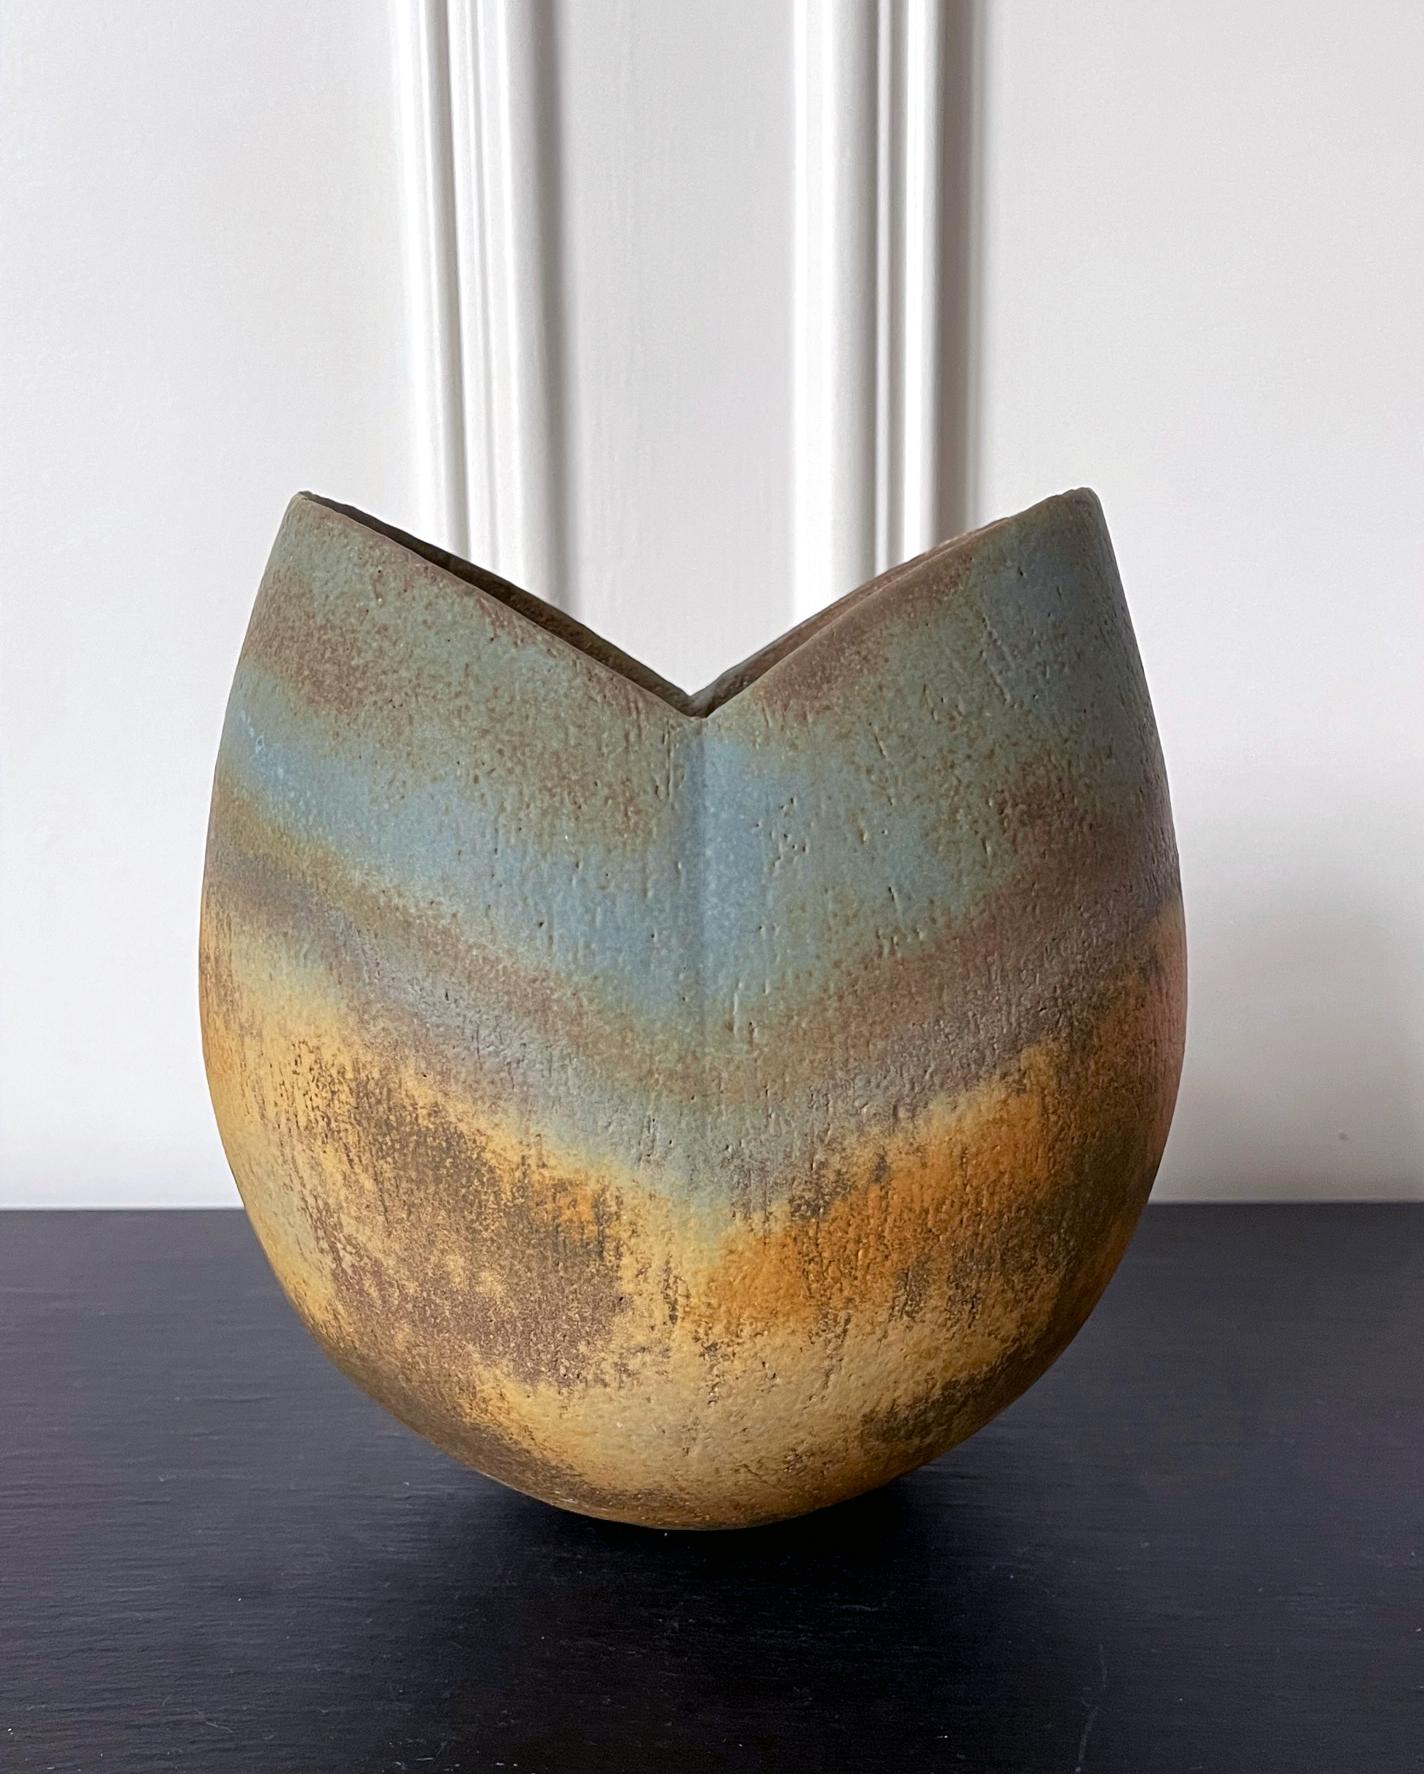 A stoneware vessel with glazed and banded stripes design by British studio ceramist John Ward (1938-2023) circa 1980s. The vessel takes its simple but distinct form between a deep bowl and a vase, resembling a lotus bud with its organic folding and